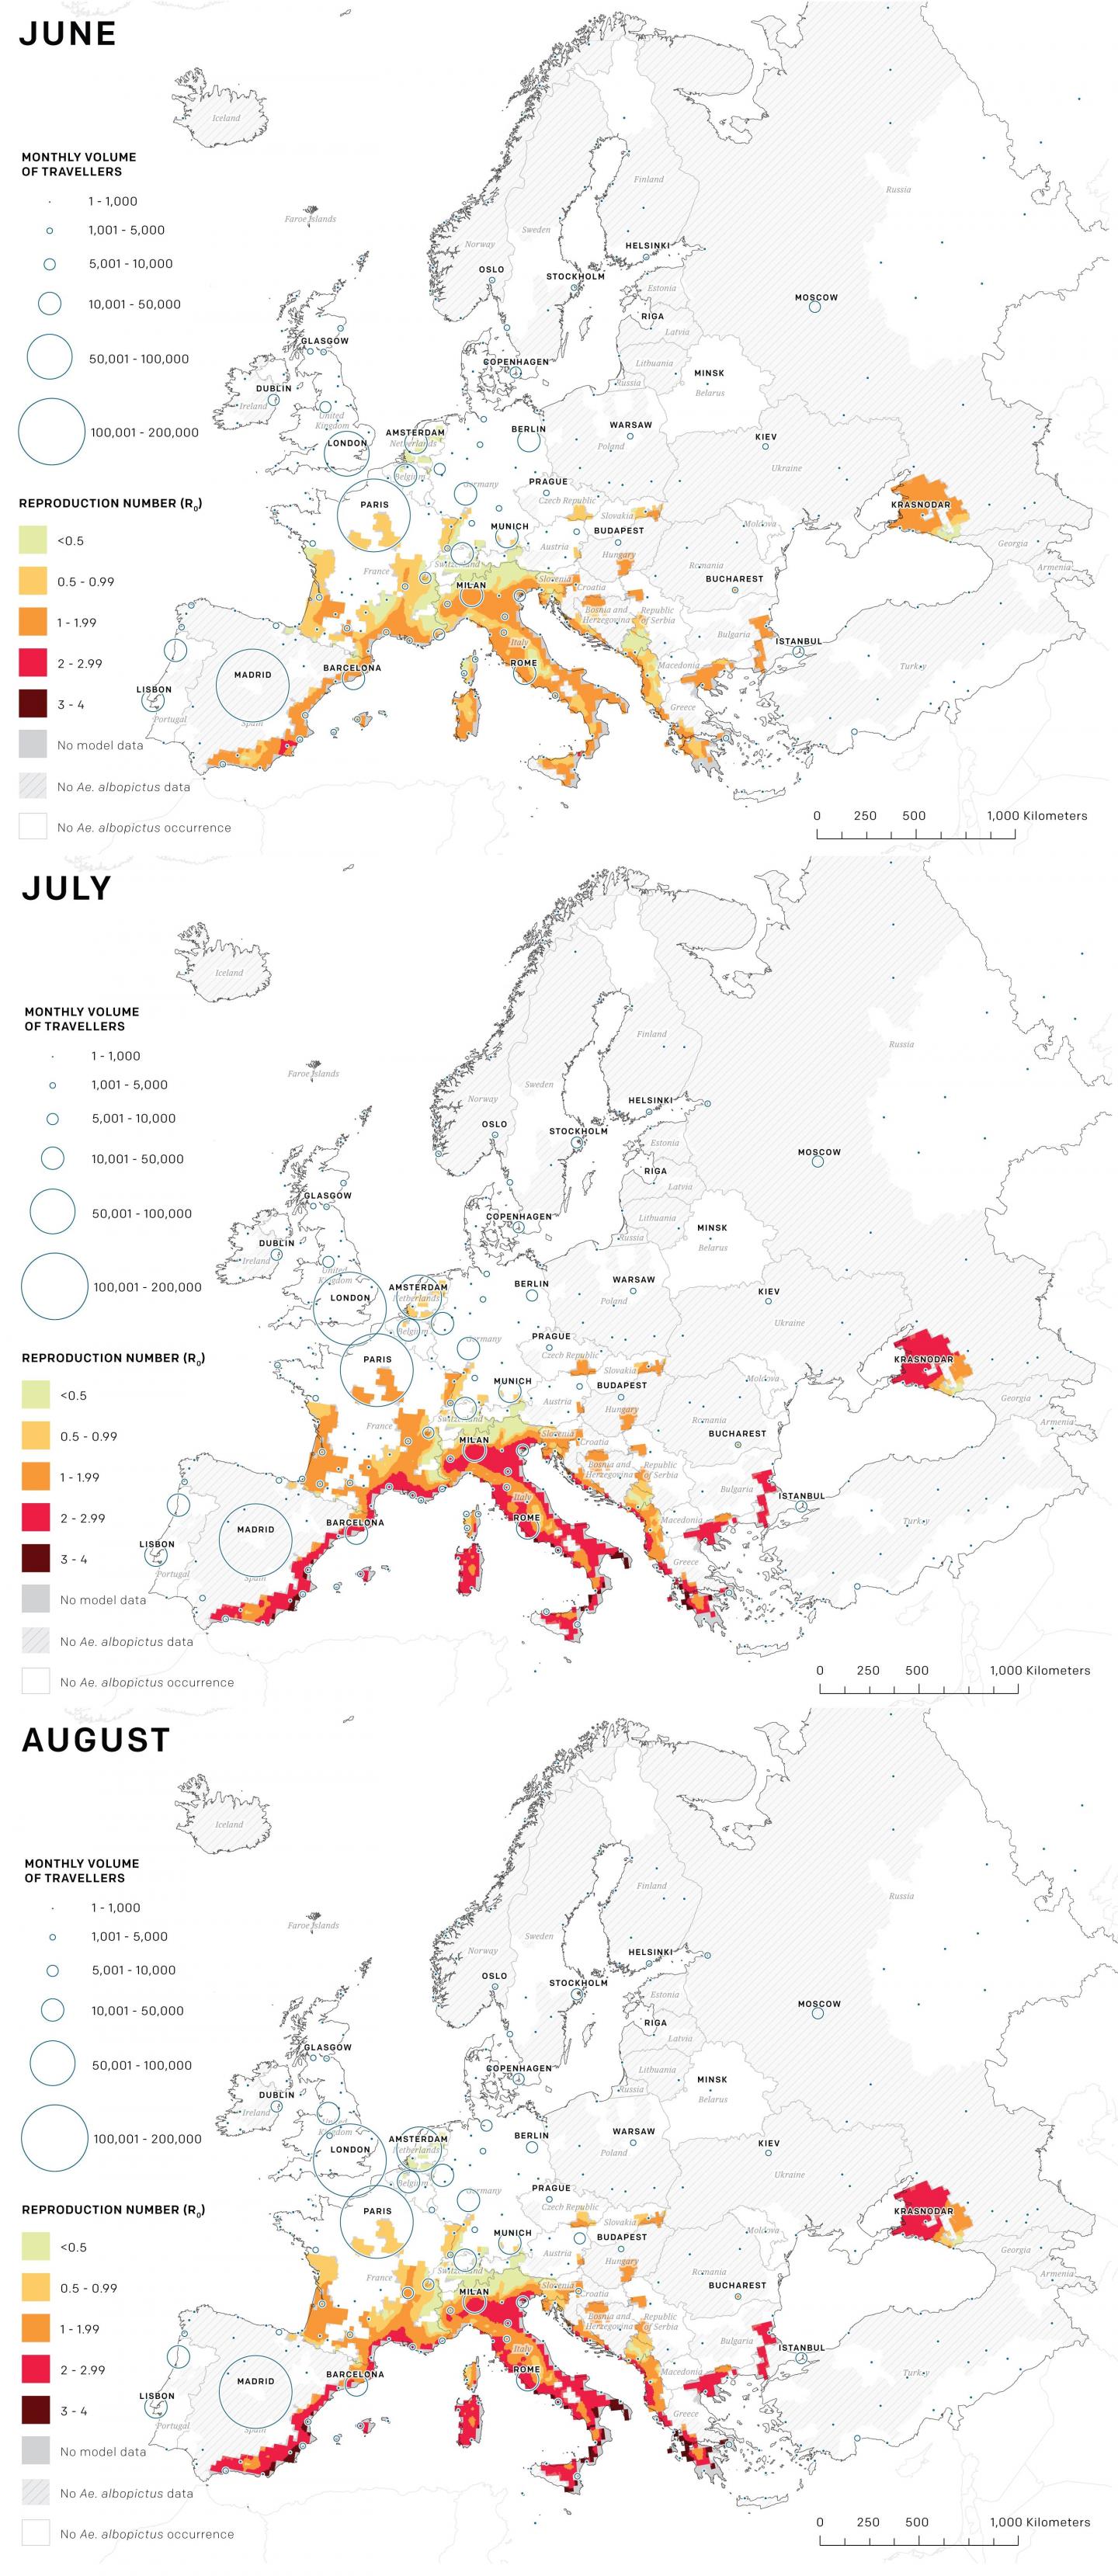 Risk areas for June-August